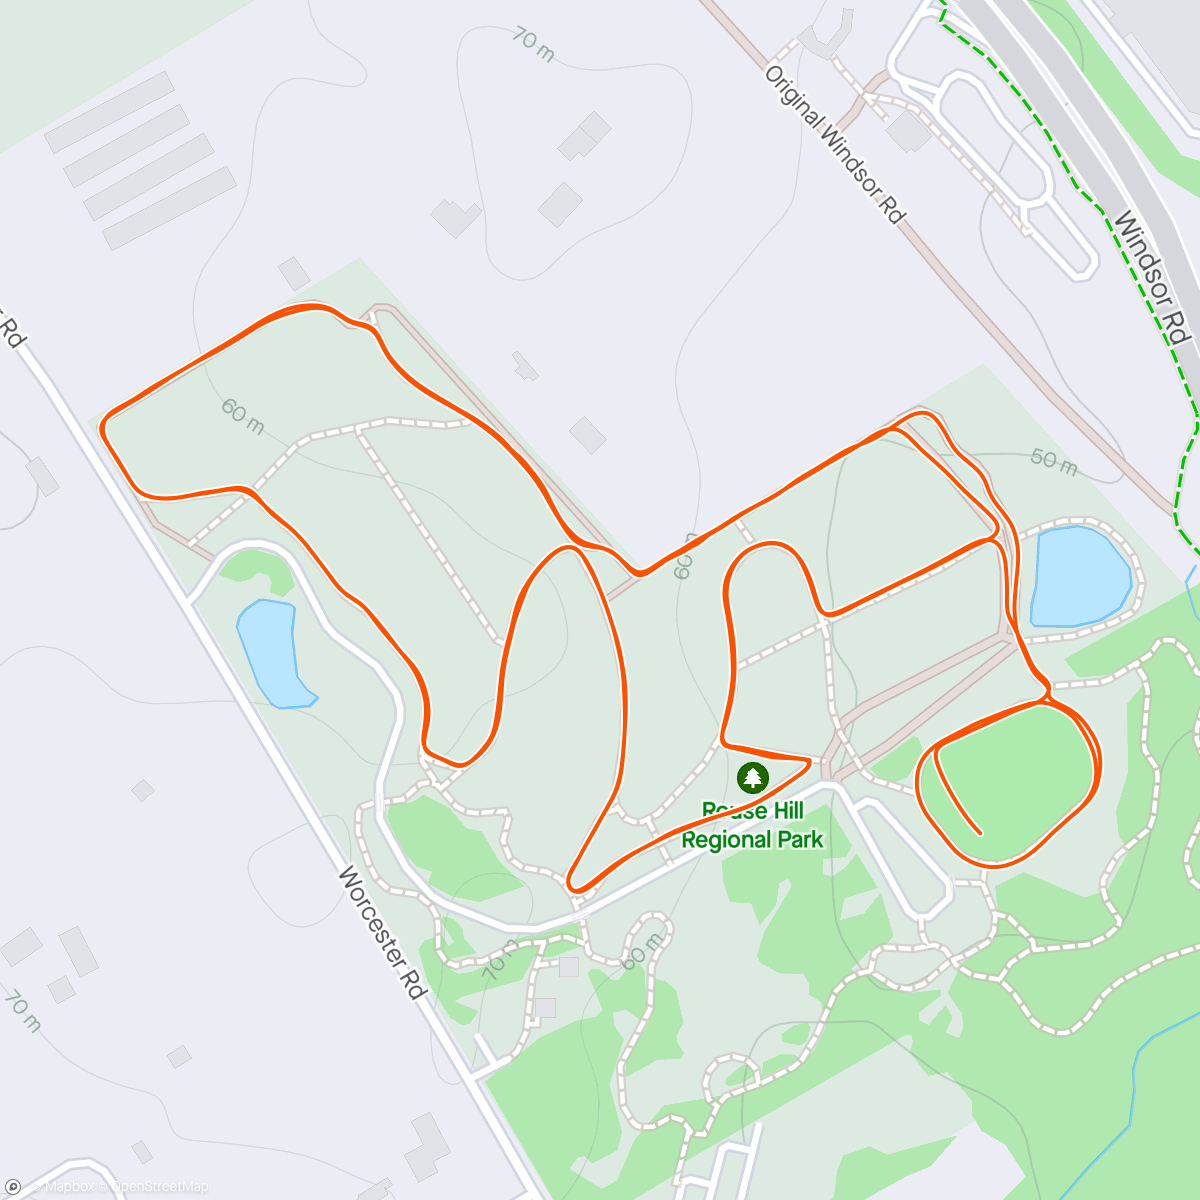 「Trail Run 2024#24 - parkrun with Rob to complete his Run the World Australia map」活動的地圖